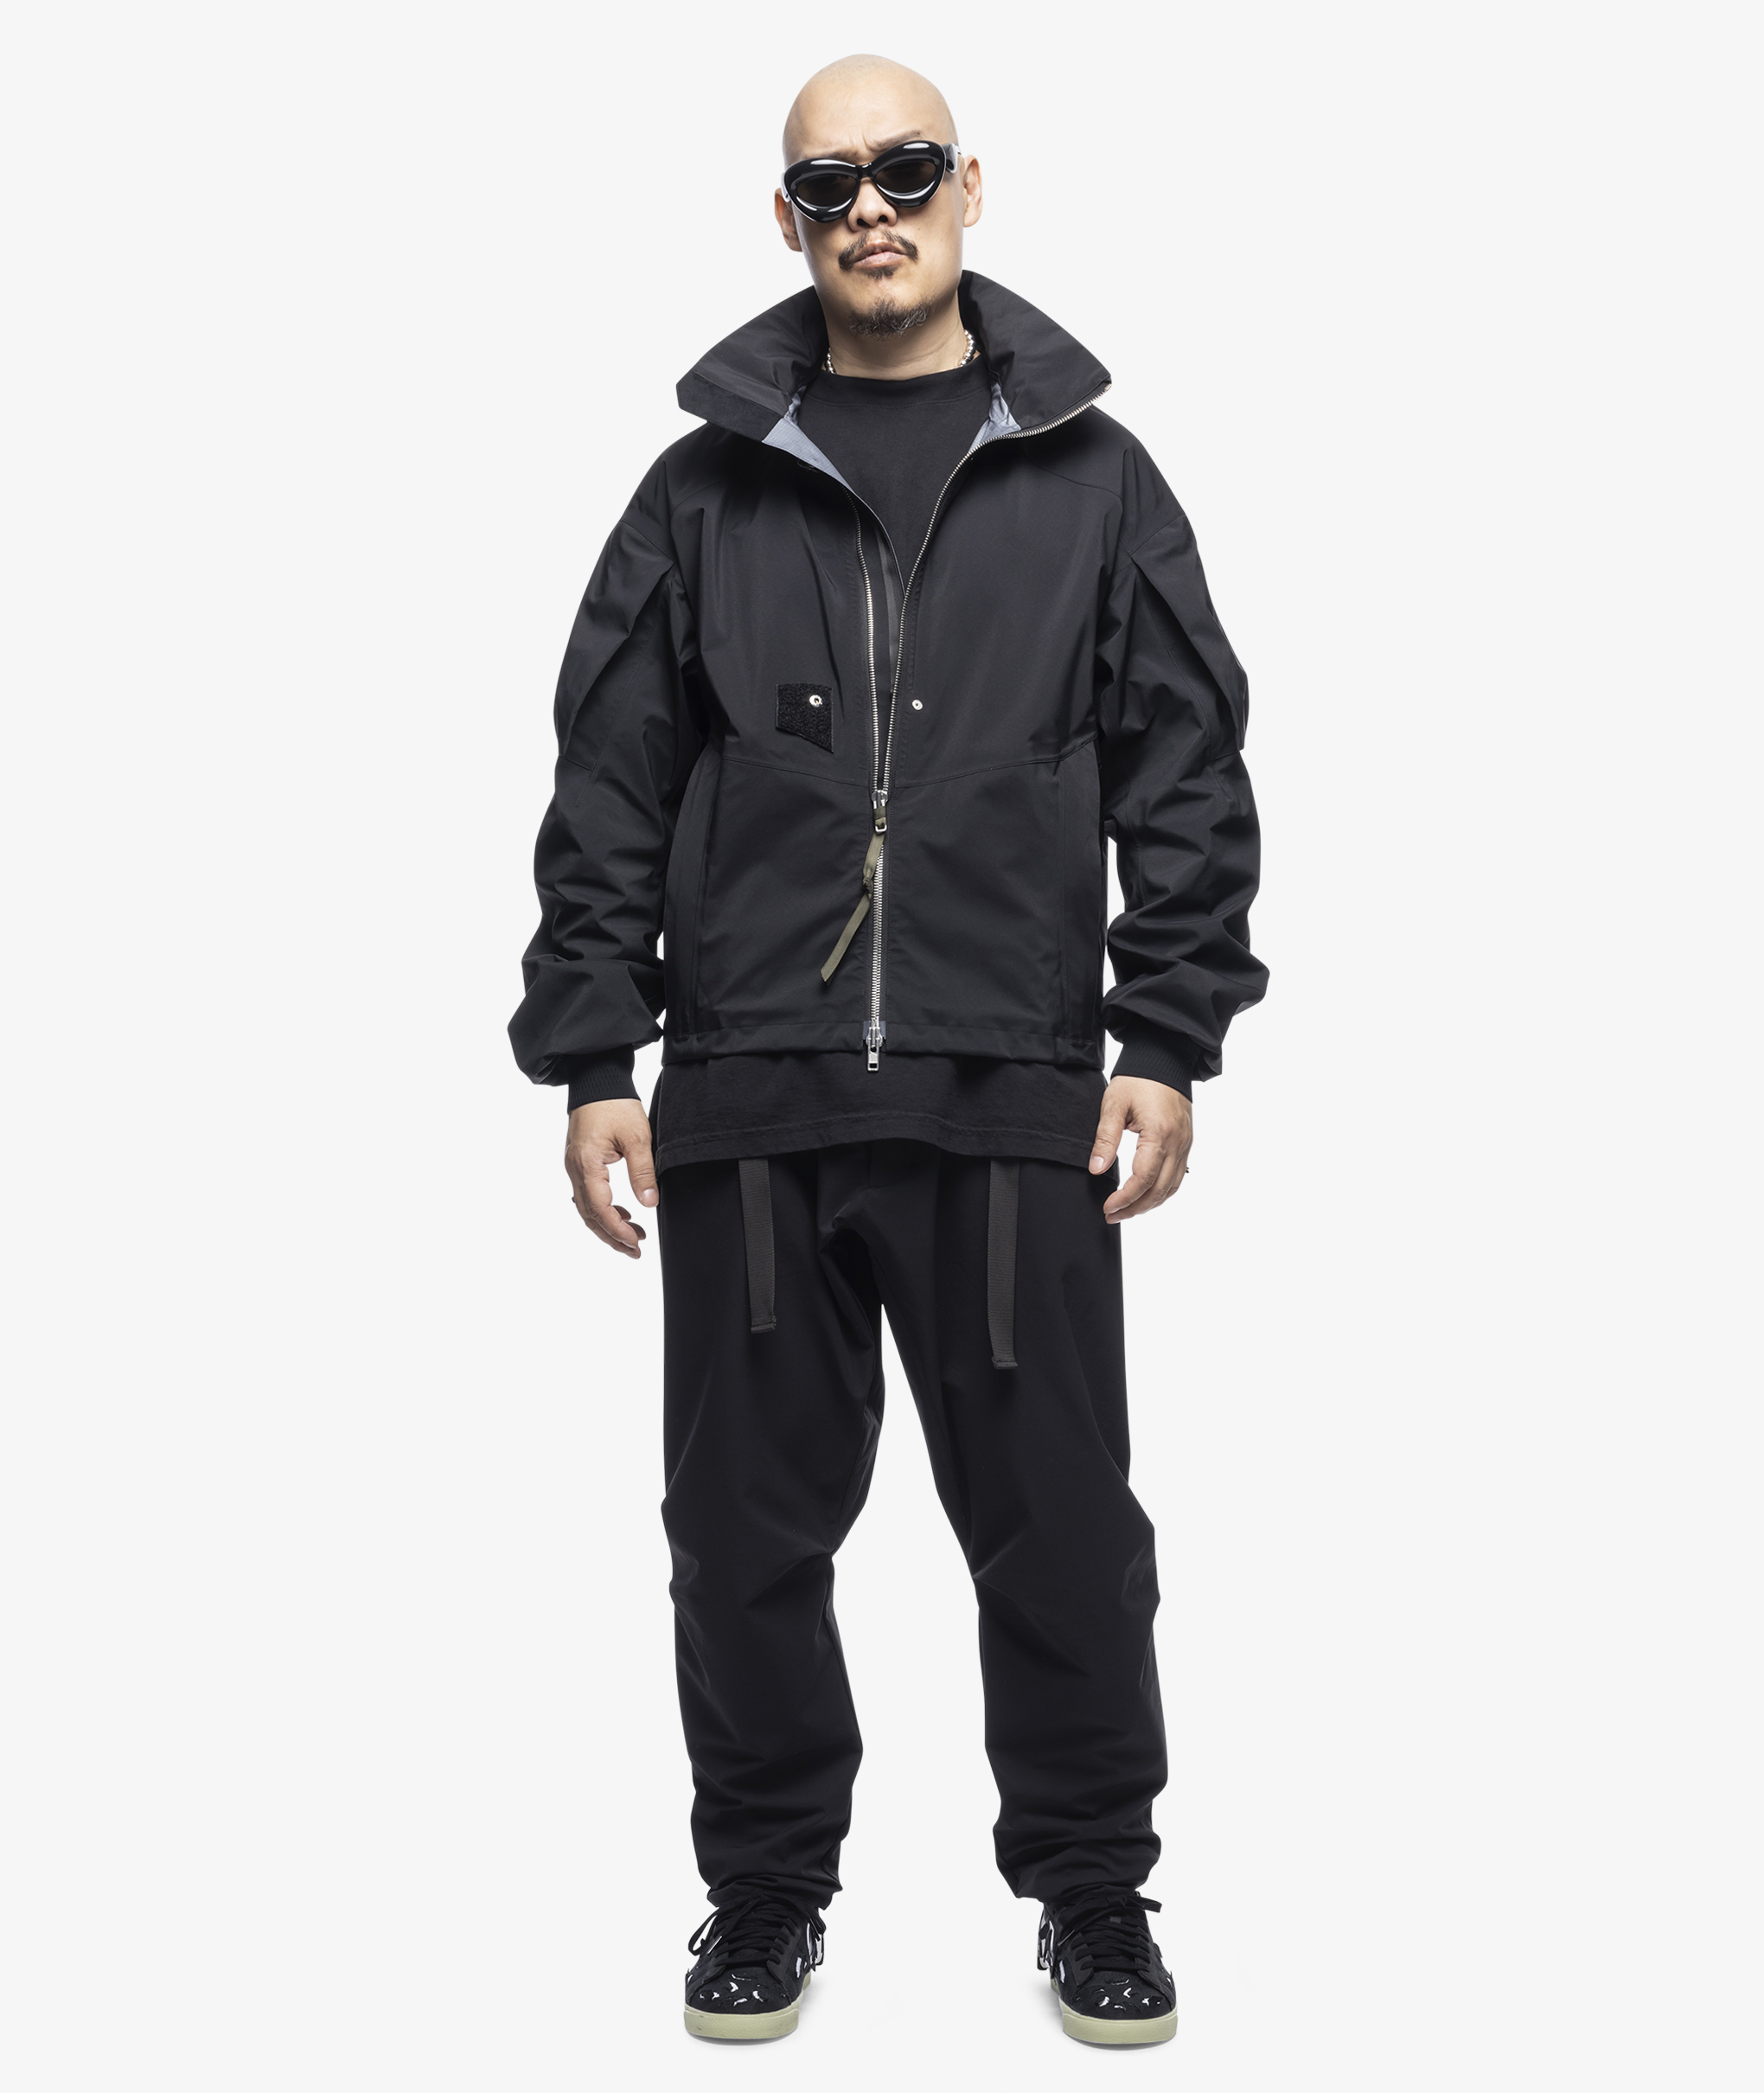 Norse Store | Shipping Worldwide - Acronym J110TS-GT - Black